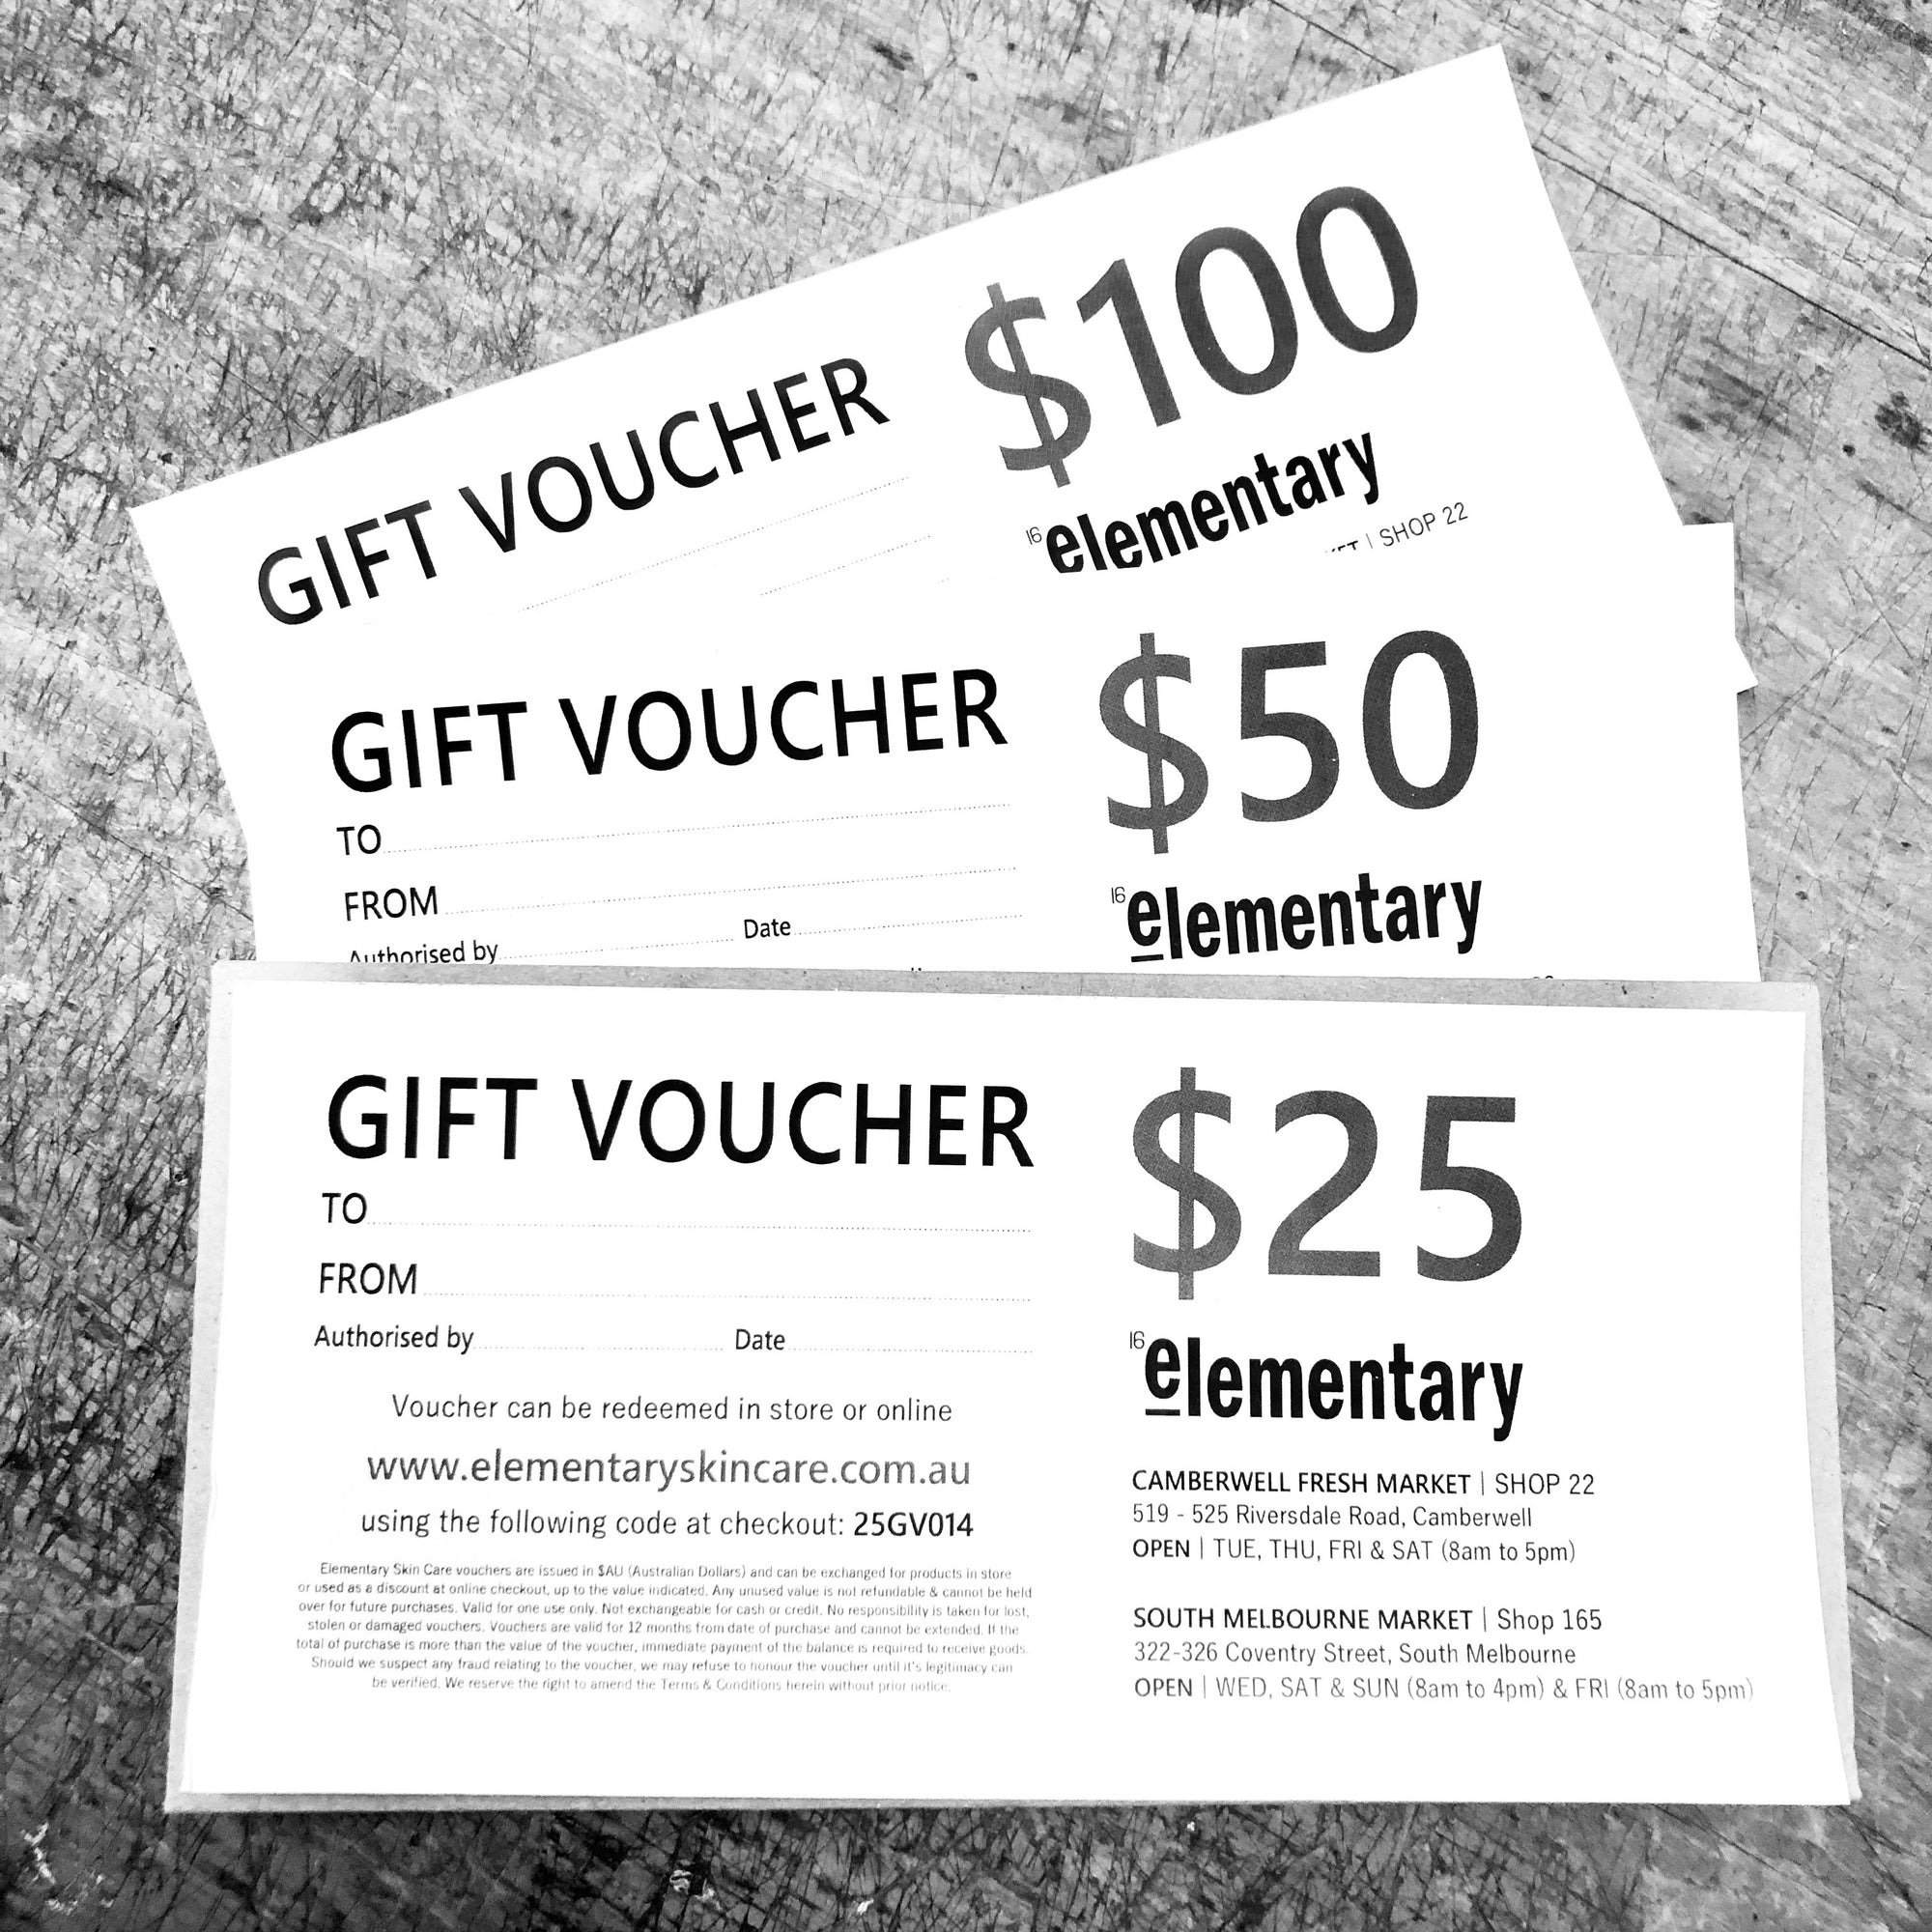 GIFTS & VOUCHERS